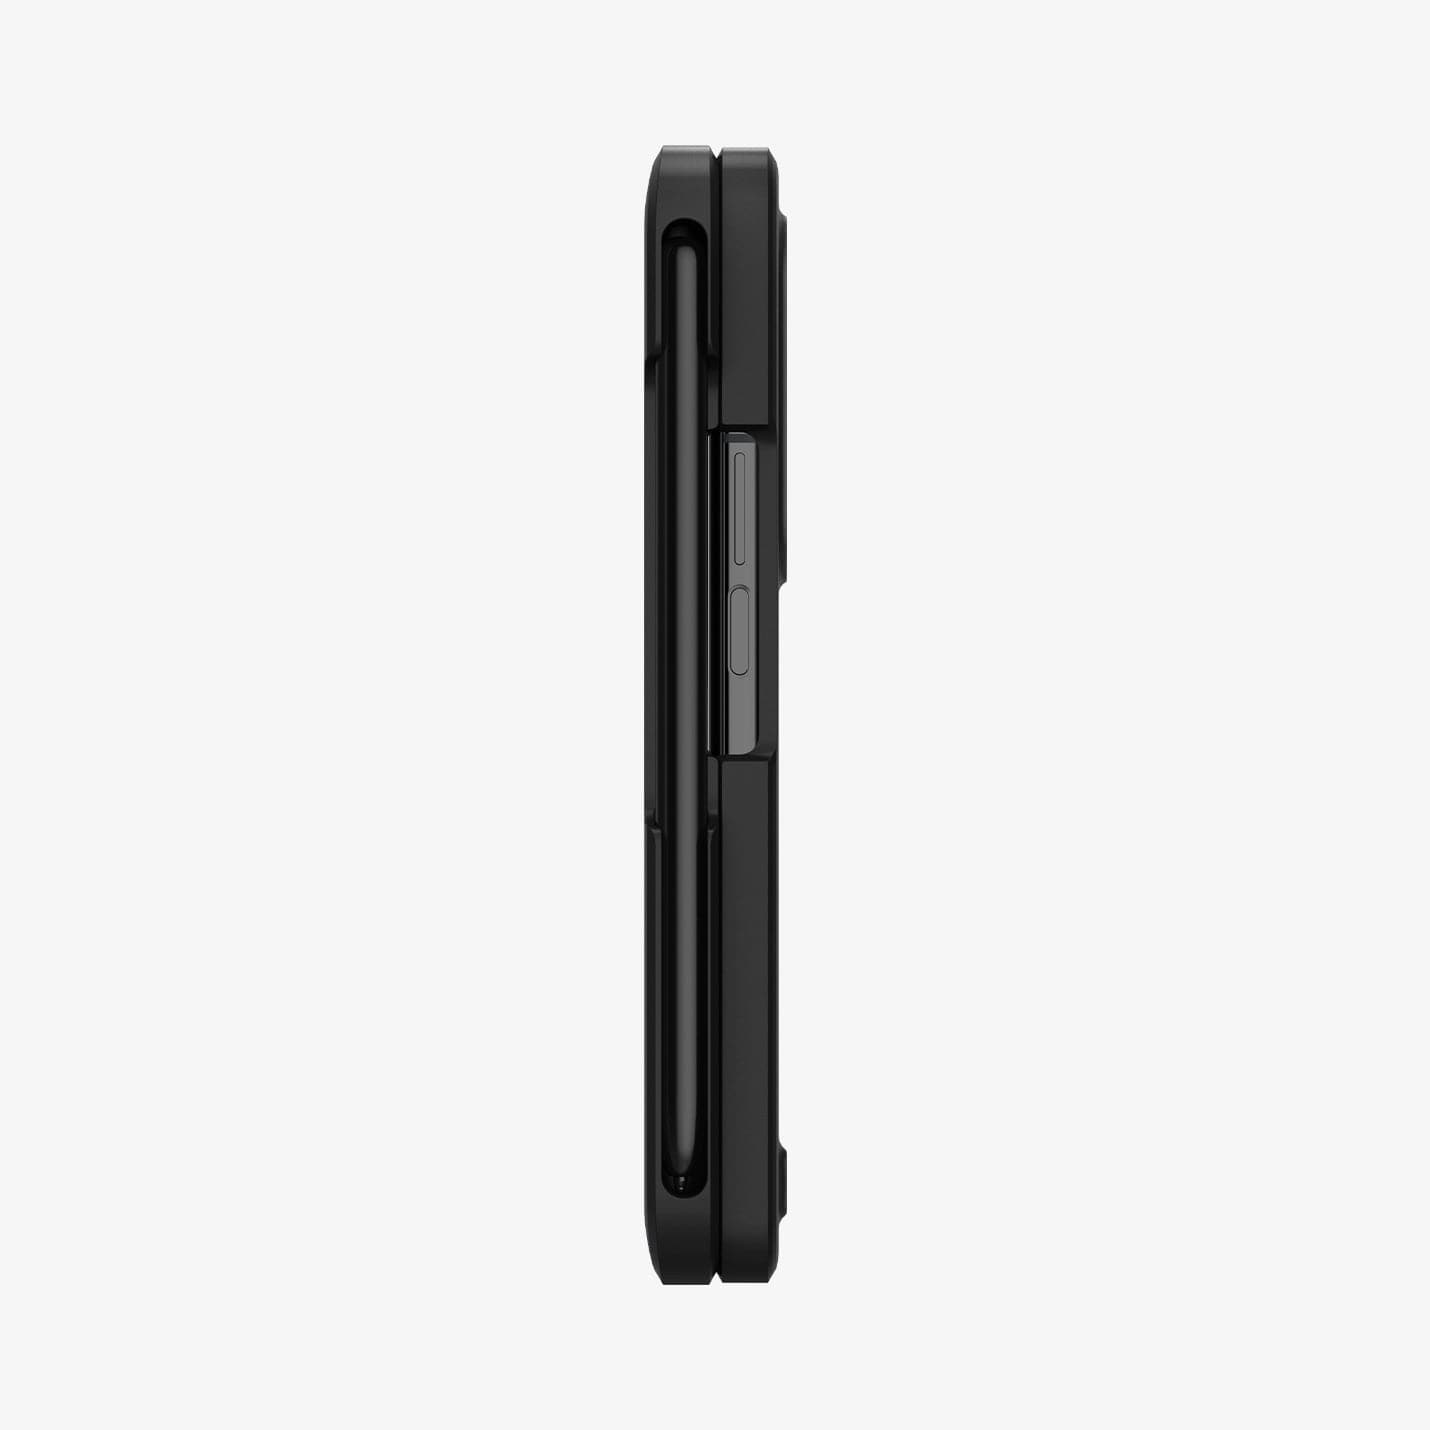 ACS03688 - Galaxy Z Fold 3 Case Thin Fit Pro in black showing the sides